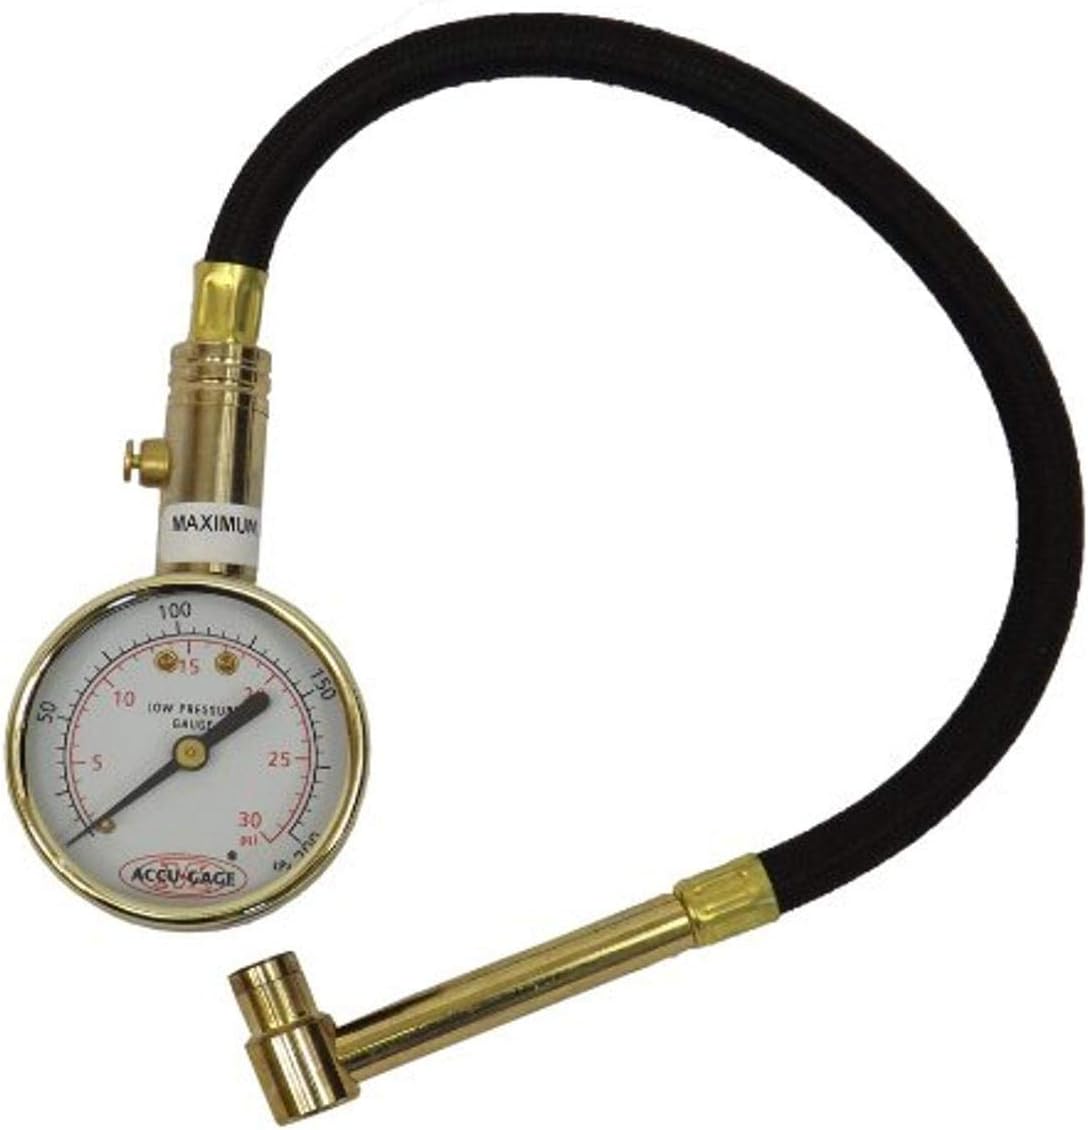 Accu-Gage RA30X (5-30 PSI) Right Angle Chuck Dial Tire Pressure Gauge with Hose